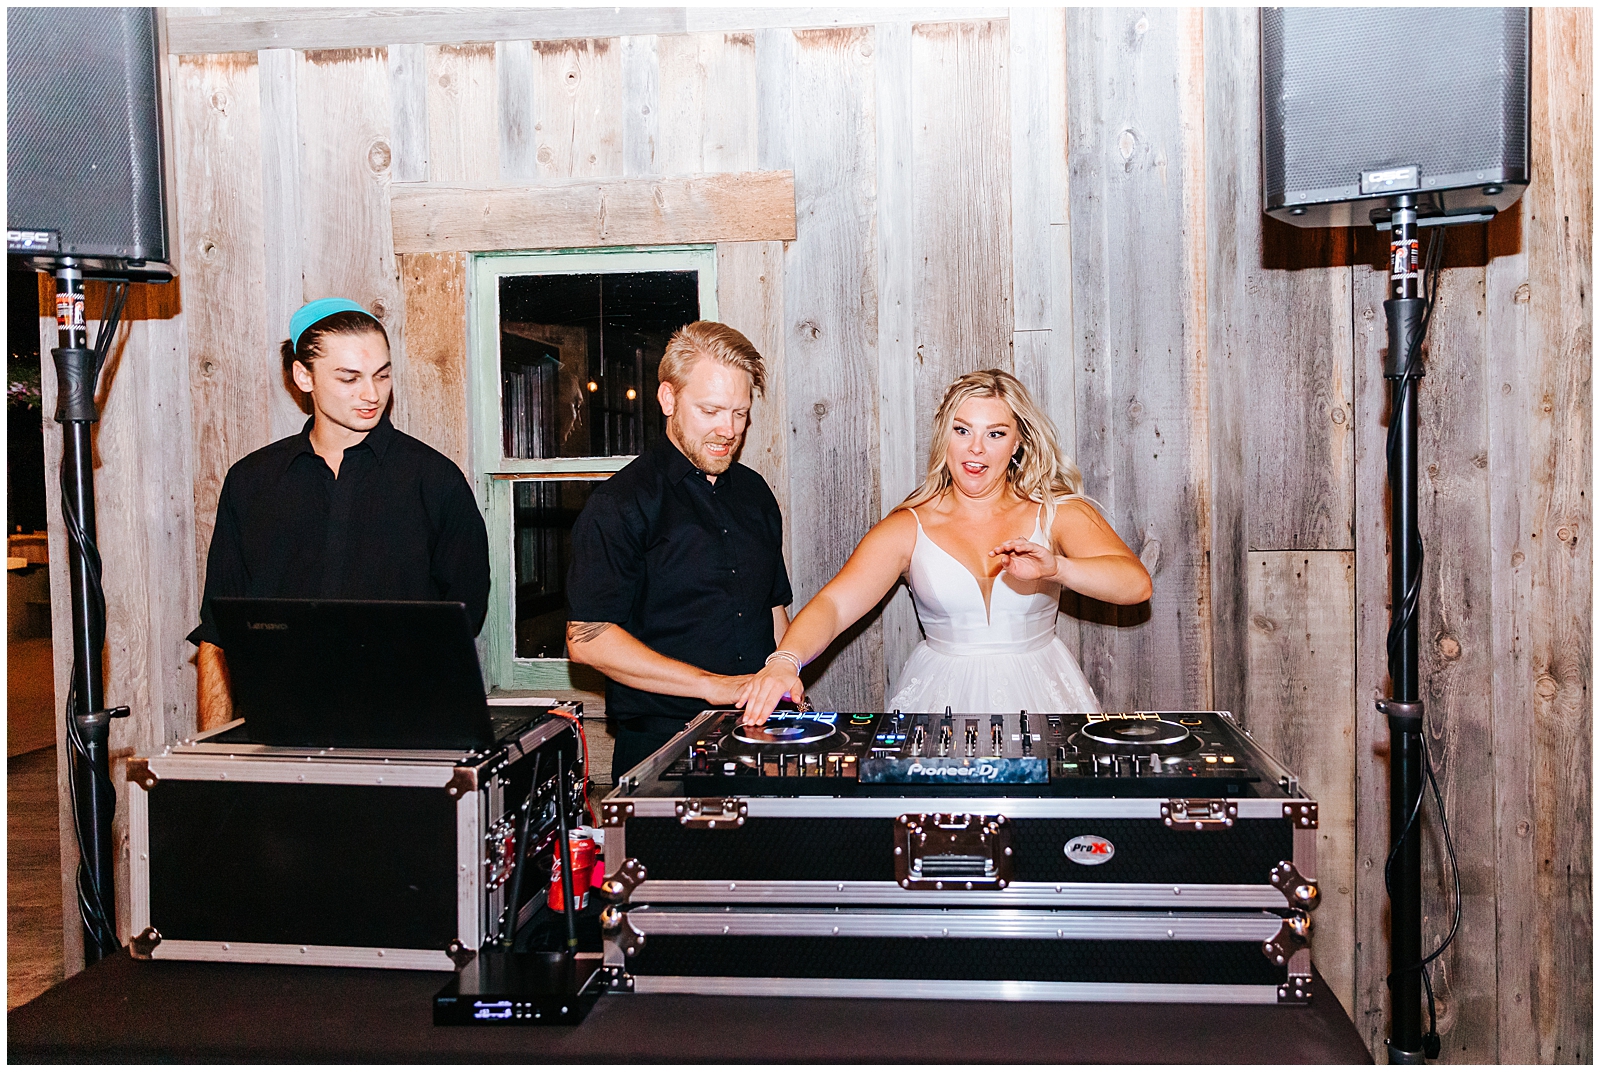 Bride jumping behind the DJ station at her wedding